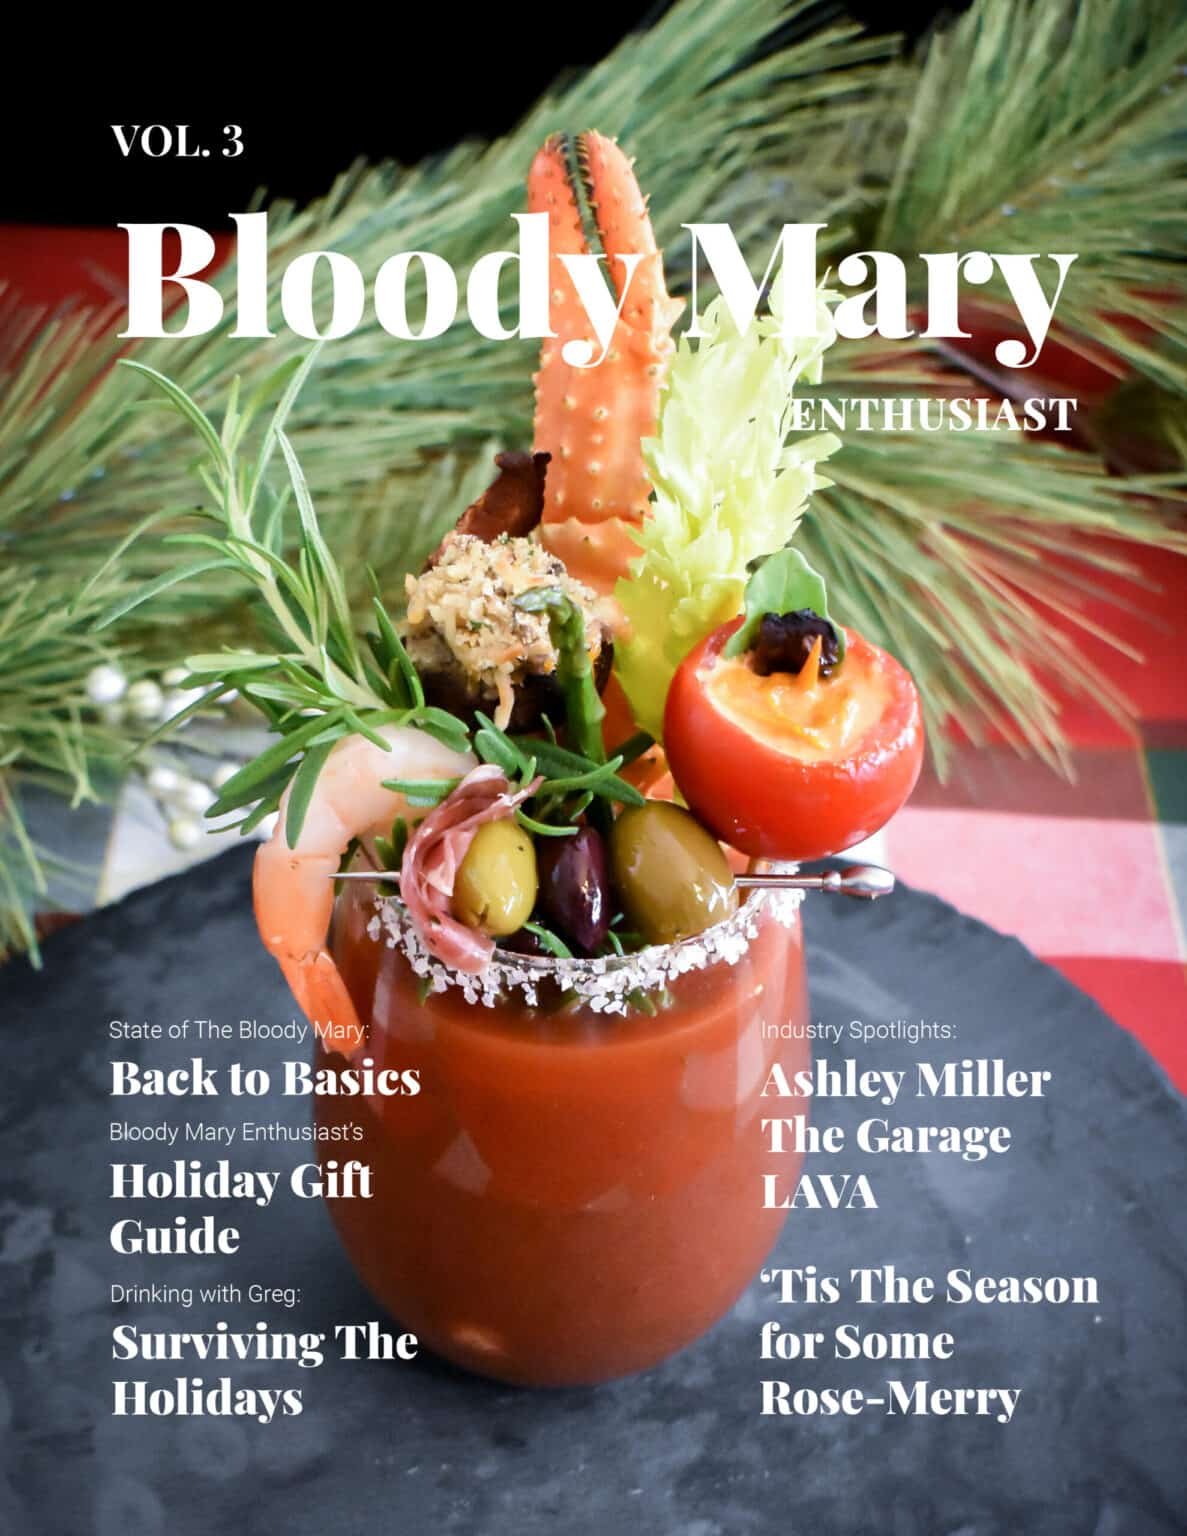 Bloody-Mary-Enthusiast-V3-Cover-1-scaled-1187x1536.jpeg